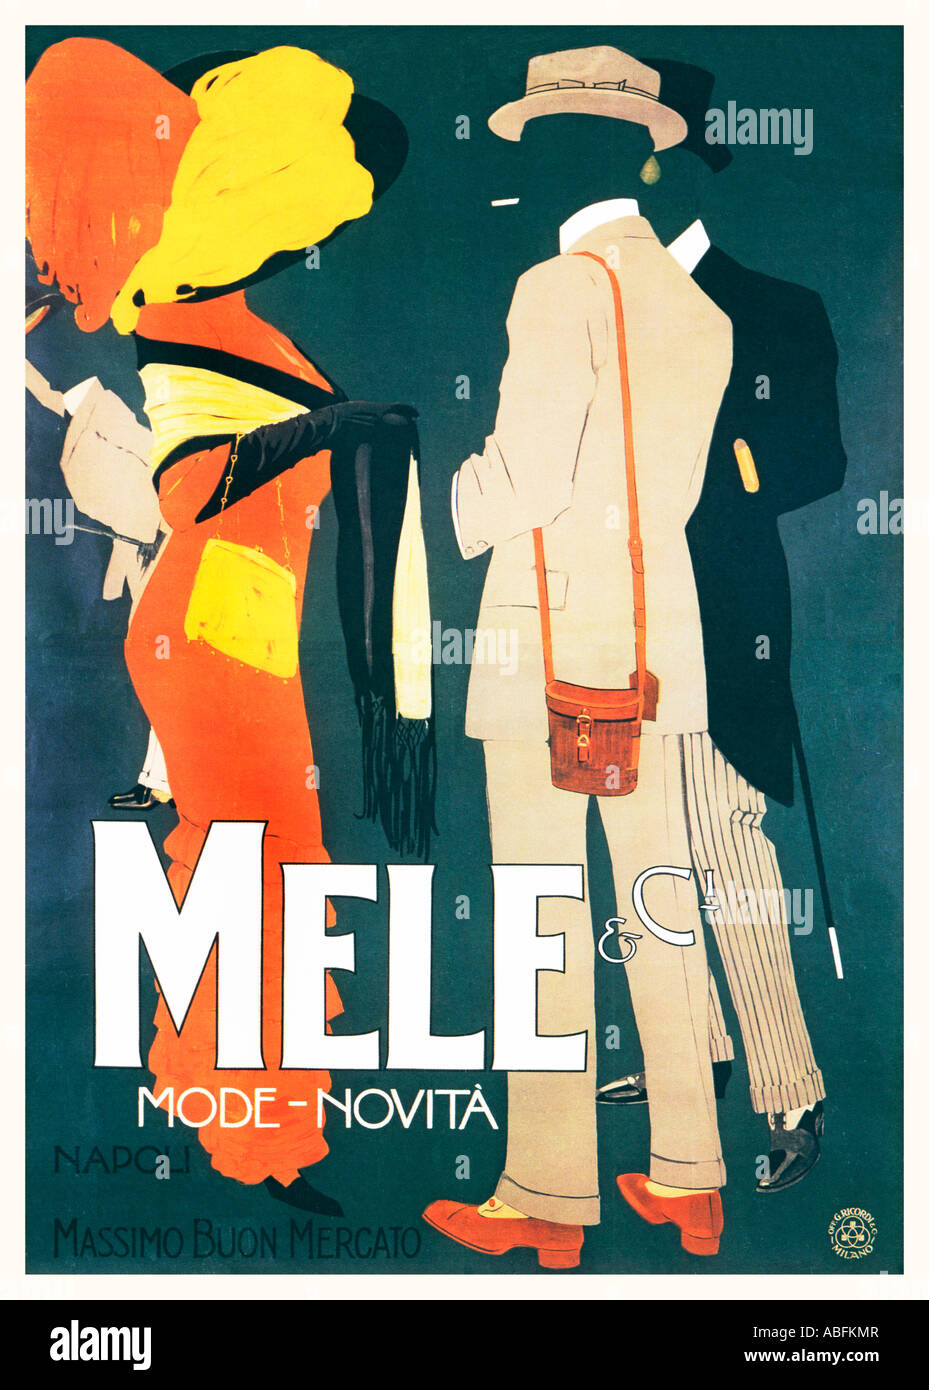 Mele Mode Novita superb 1913 Italian Art Nouveau poster by Dudovitch for  the Fashion House in Naples Stock Photo - Alamy